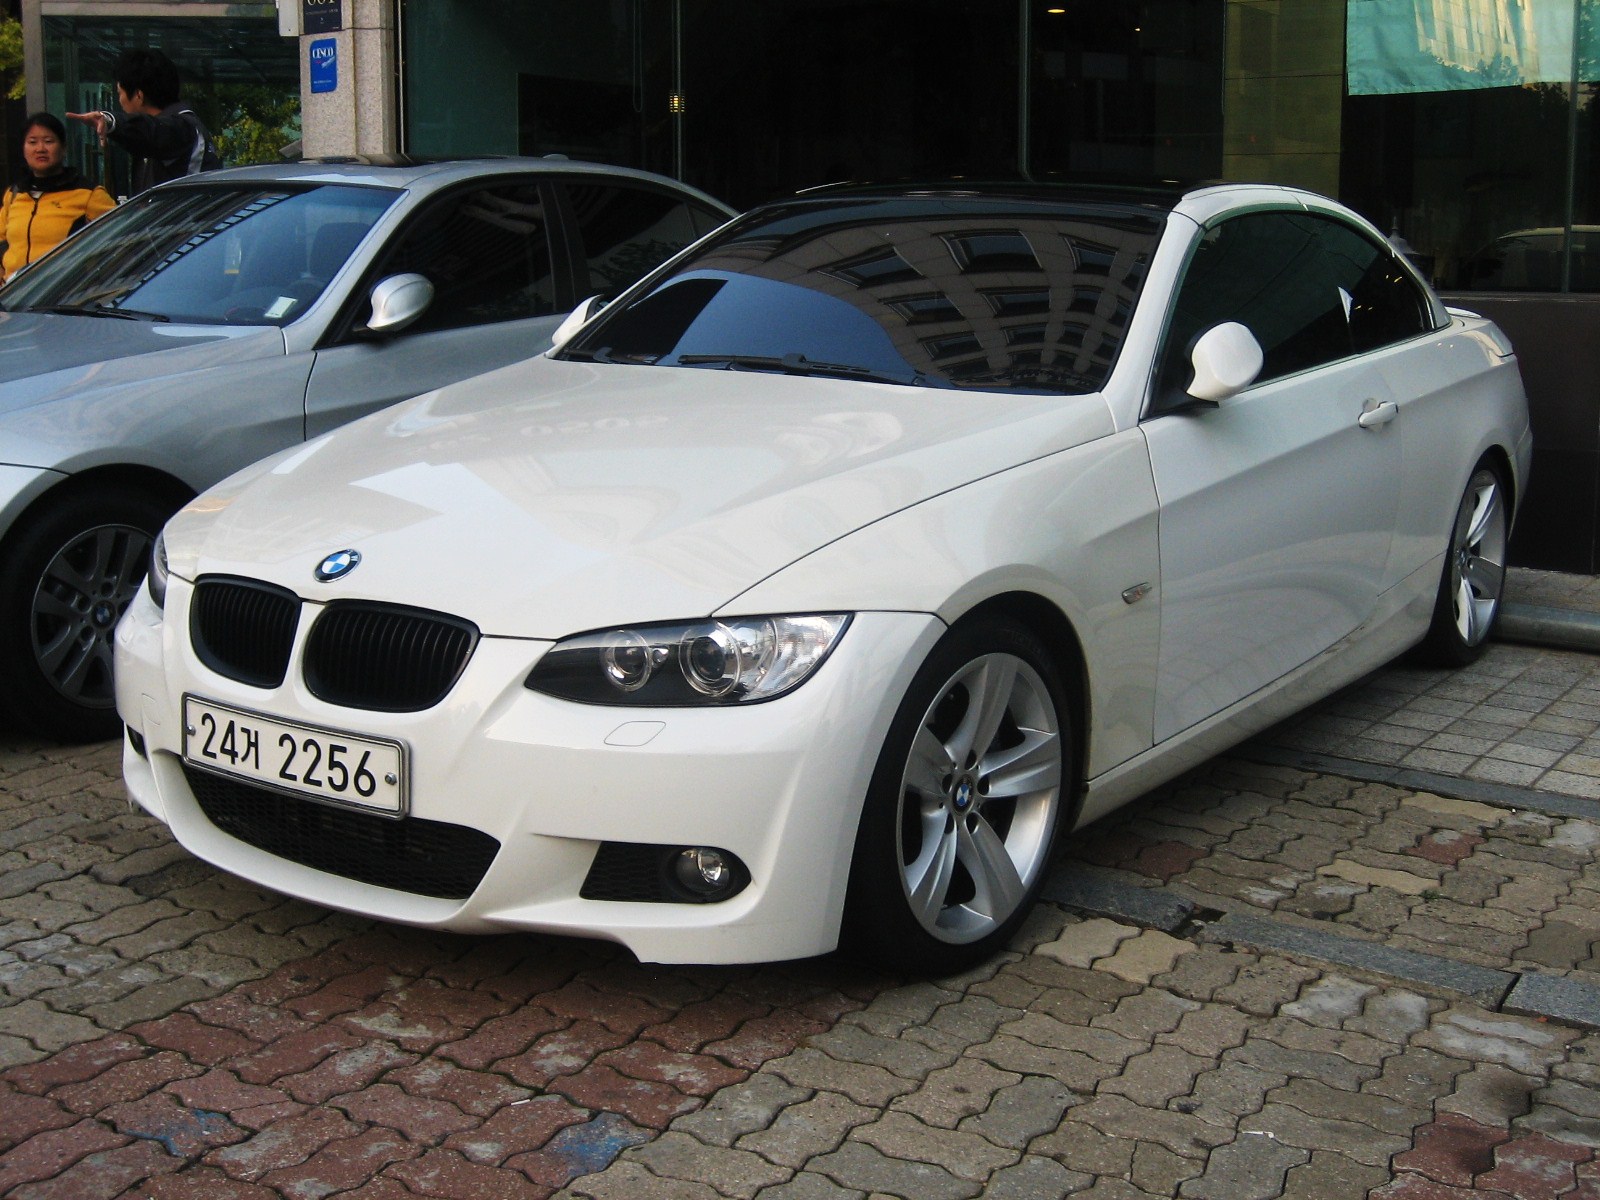 BMW 335i Cabriolet to Scr3m1ng by ~Kia-Motors on deviantART